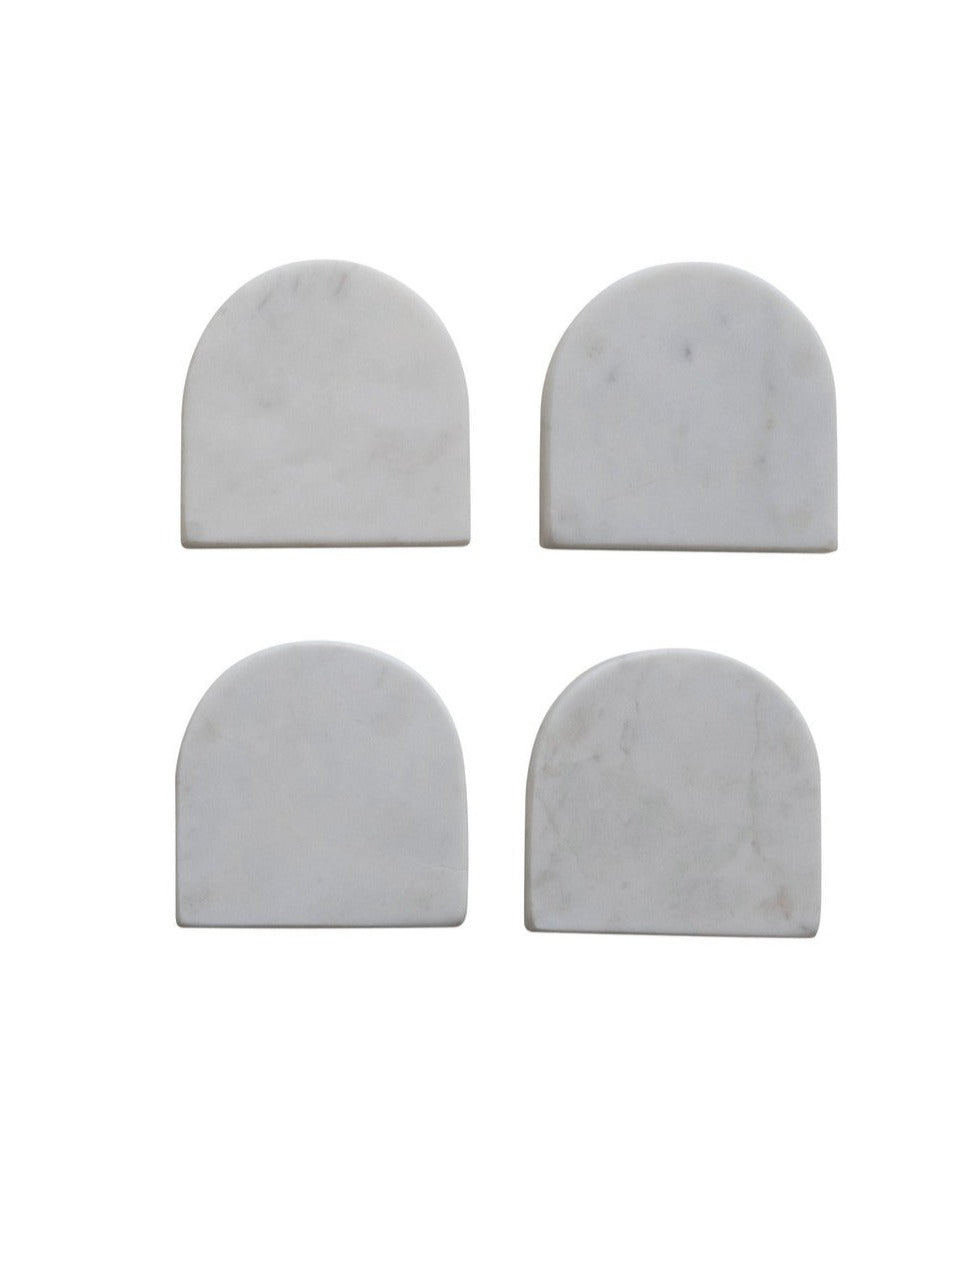 Arched Marble Coasters - Set of 4